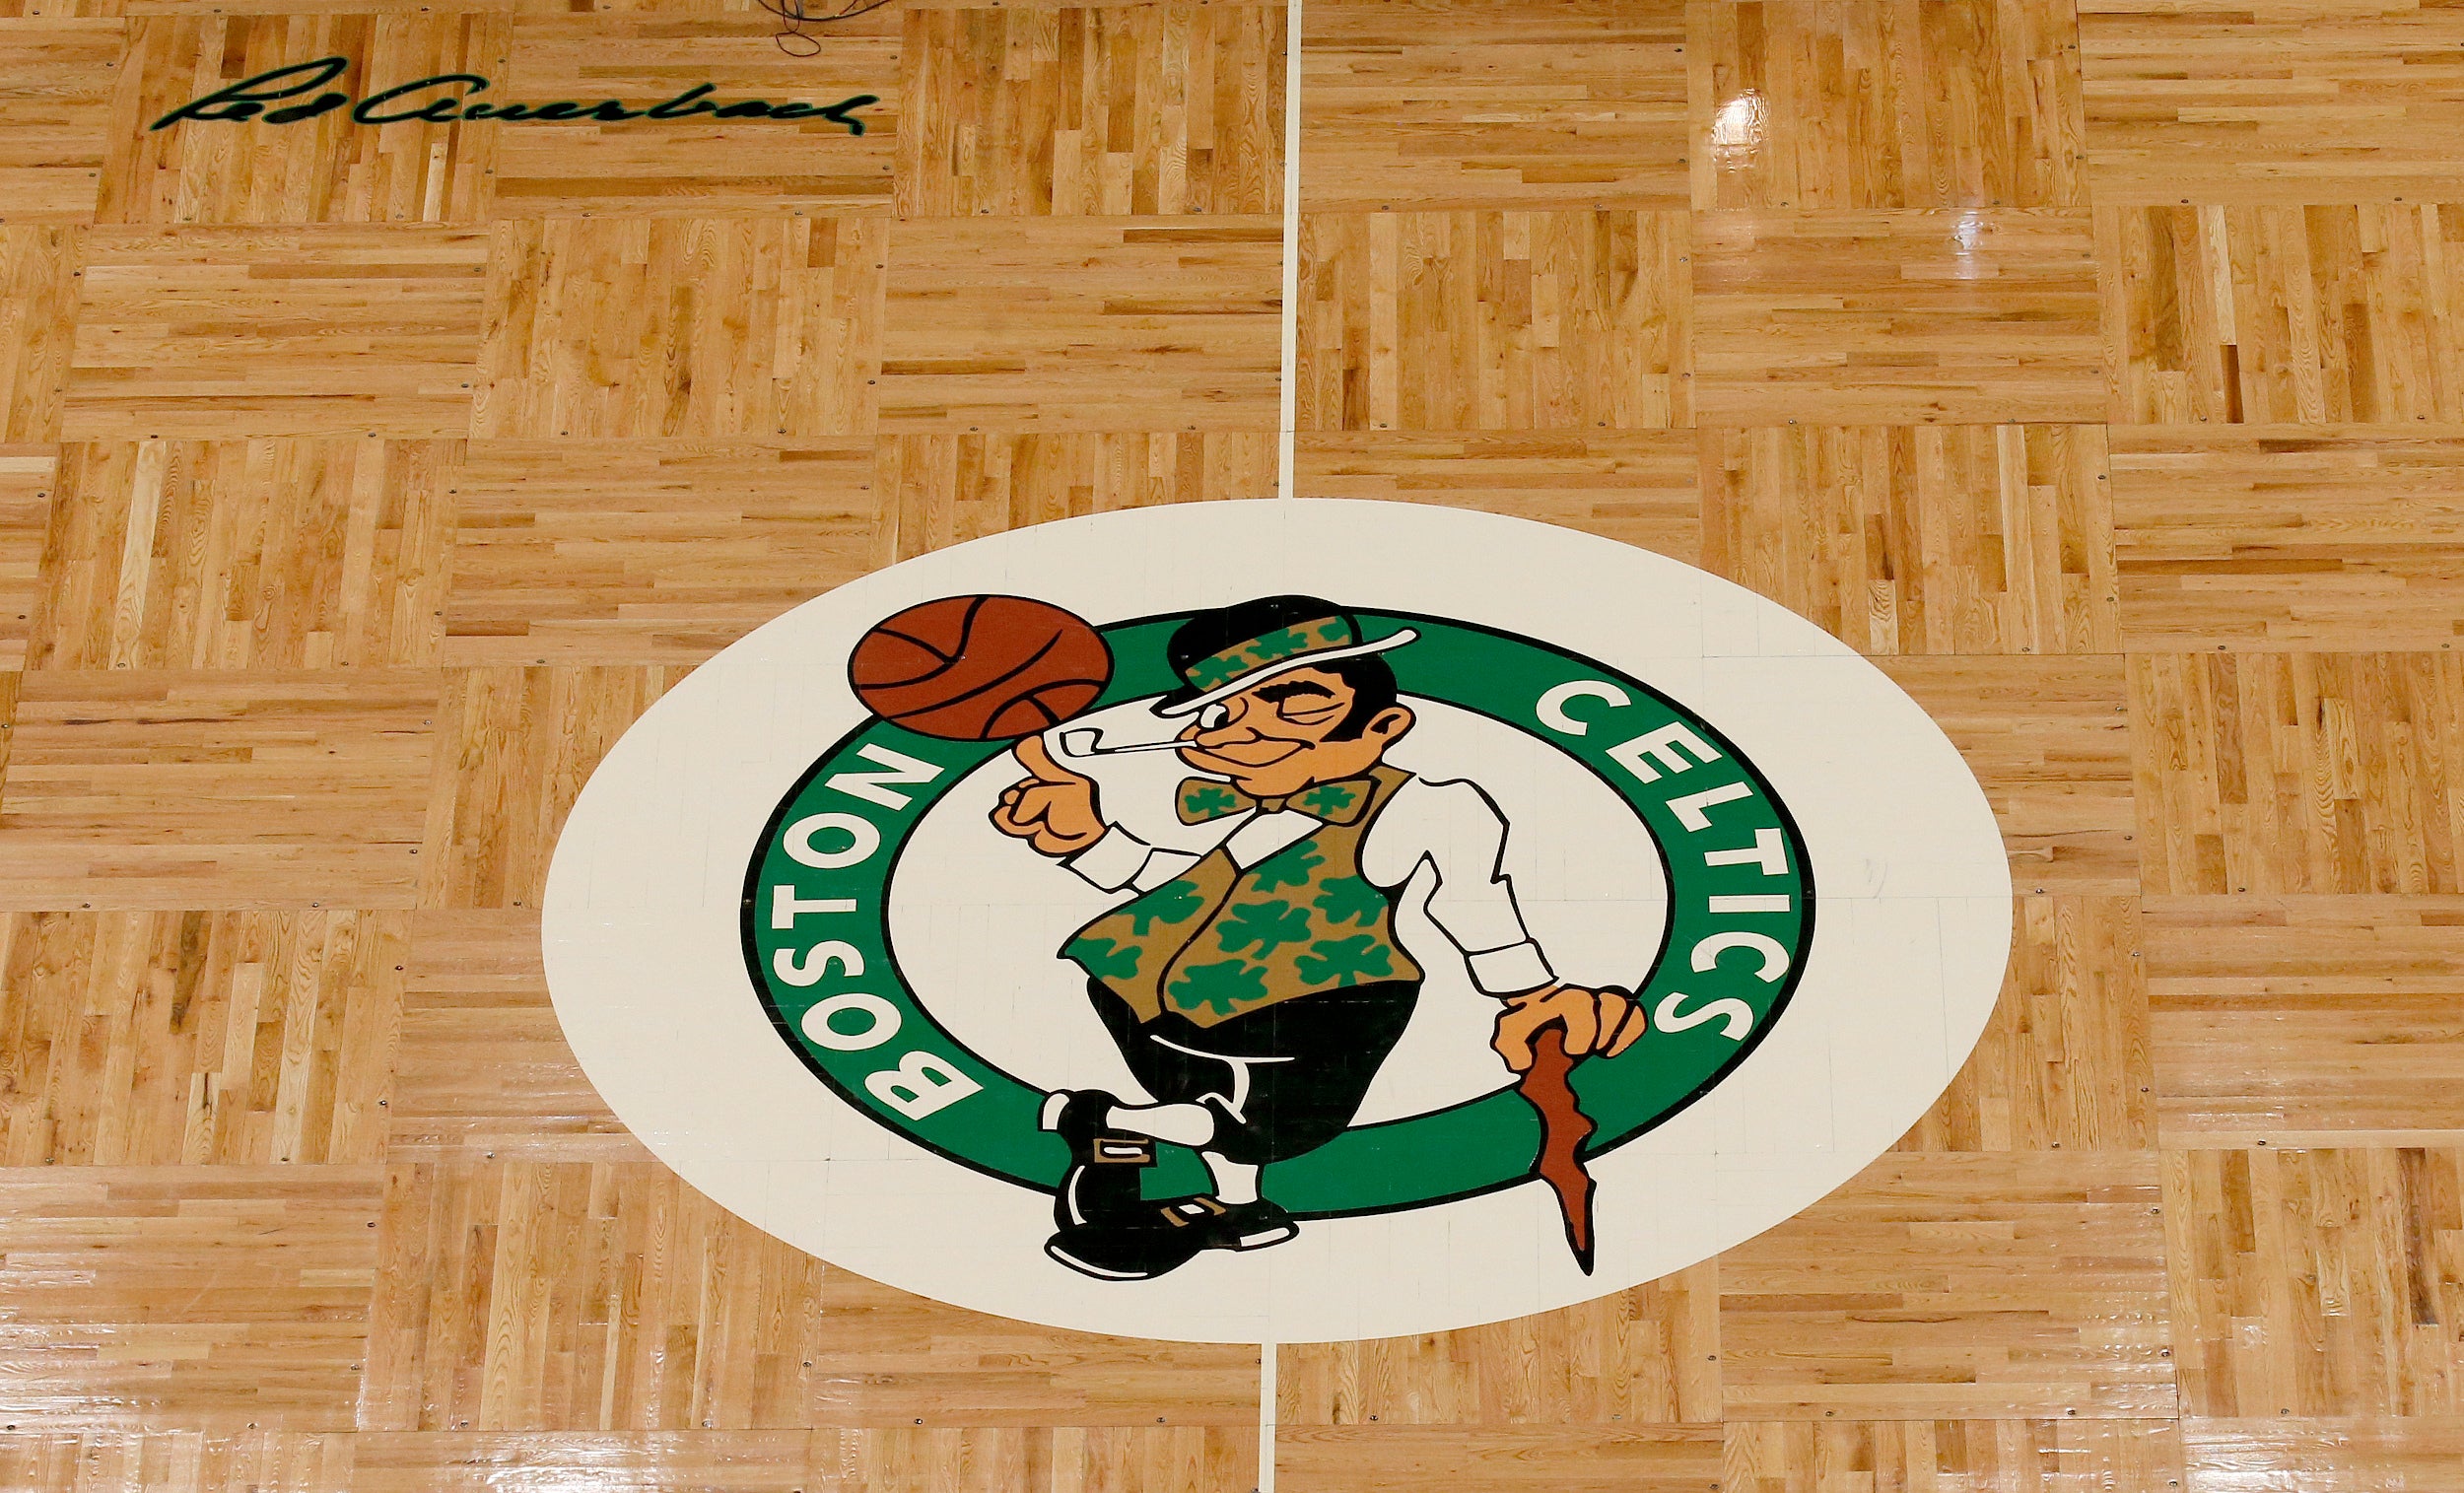 The Boston Celtics logo and Red Auerbach signature are seen on the TD Garden parquet floor before the start of an NBA basketball game, Wednesday, Feb. 27, 2019, in Boston.